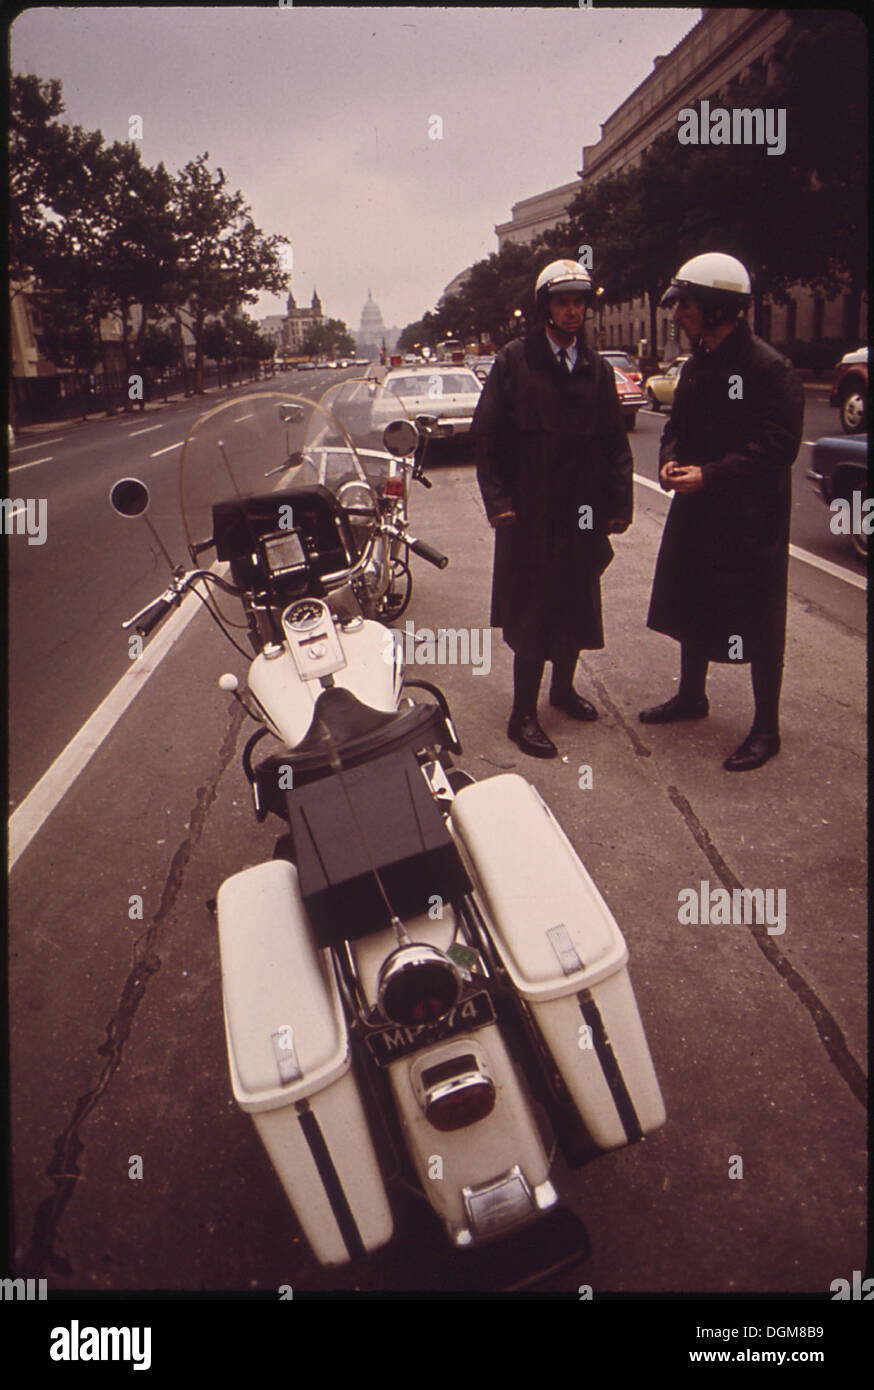 MOTORCYCLE POLICE AT SCENE OF ACCIDENT ON PENNSYLVANIA AVENUE, NW 546645 Stock Photo